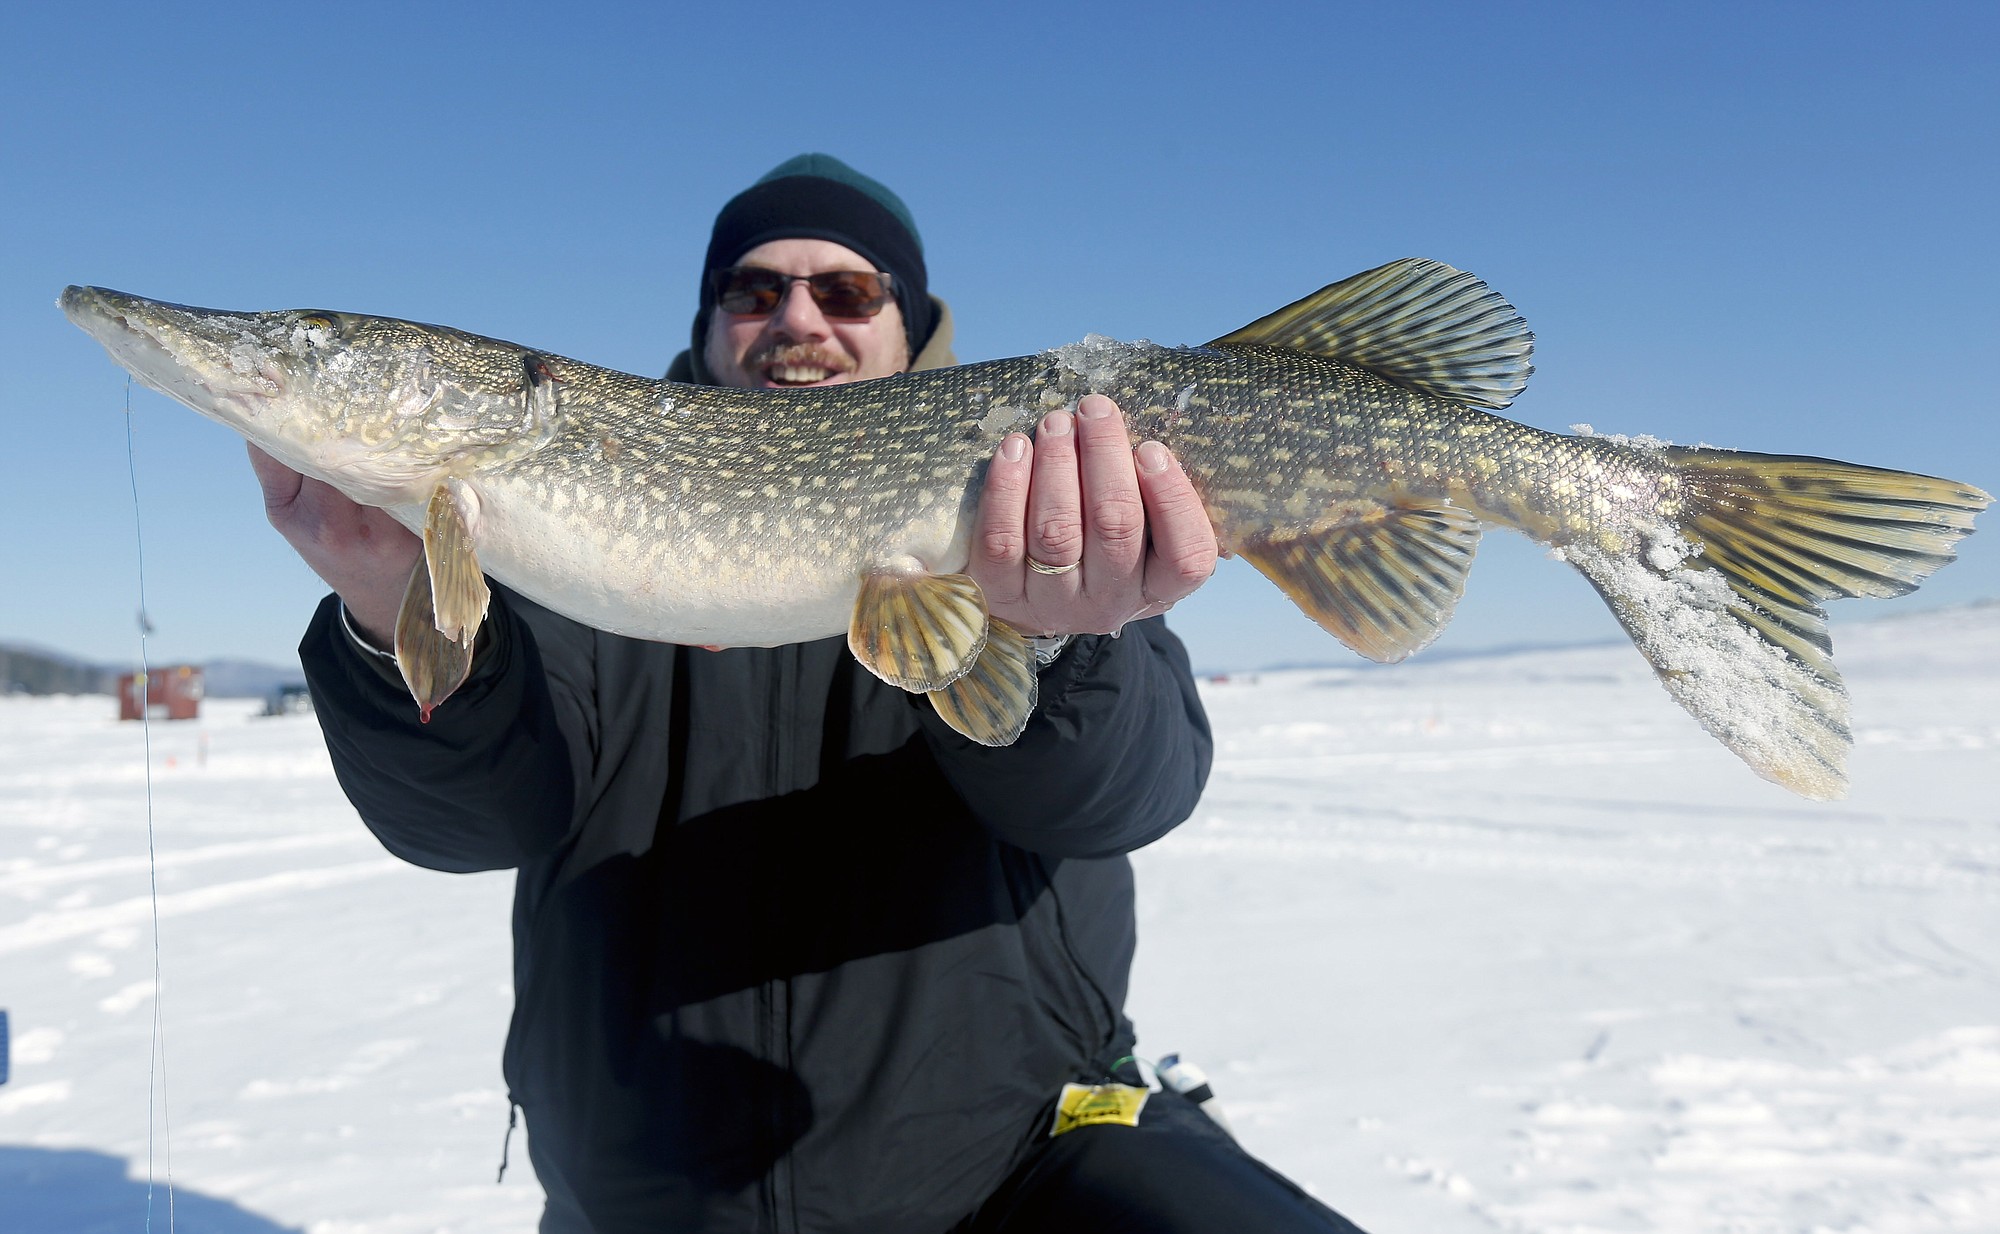 Associated Press files
Bruce Gollmer of Niskayuna, N.Y., holds a northern pike he caught while ice fishing Jan. 31 on Great Sacandaga Lake in Mayfield, N.Y.